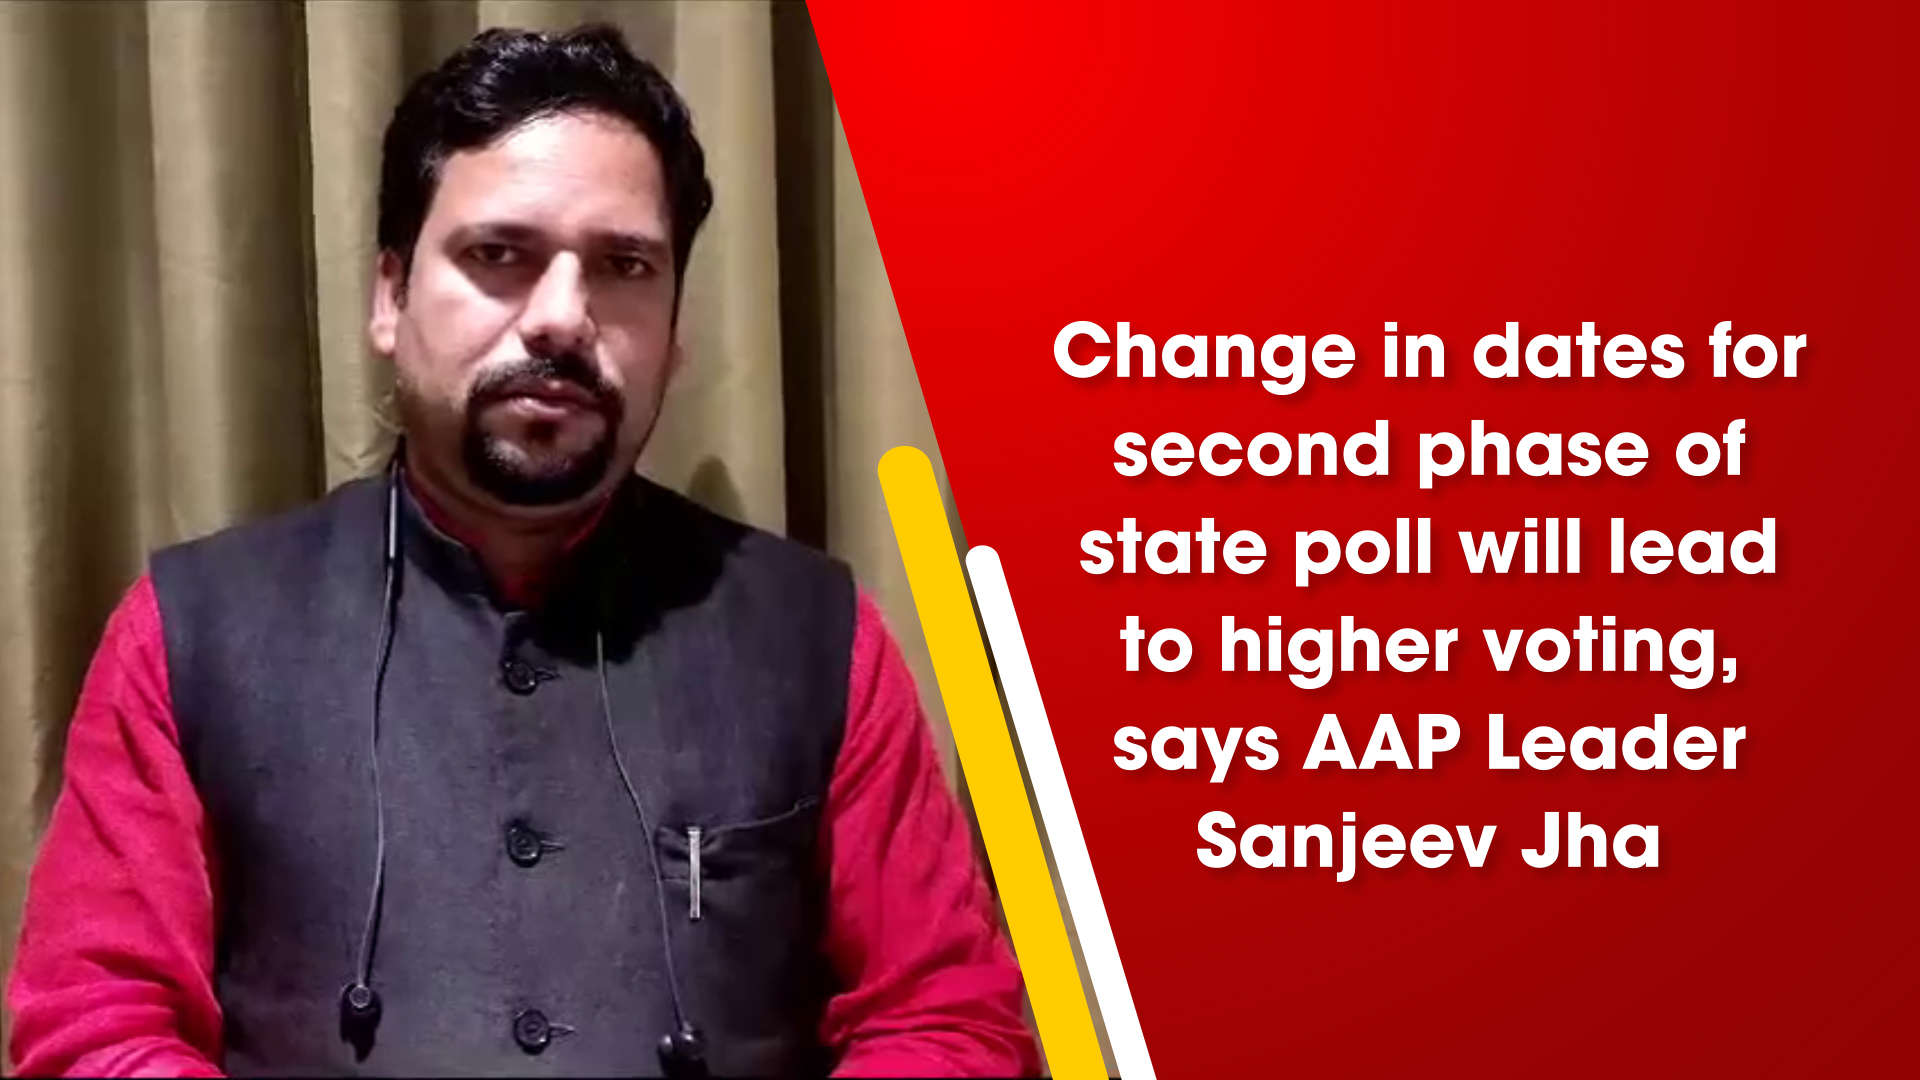 Change in dates for second phase of state poll will lead to higher voting, says AAP Leader Sanjeev Jha